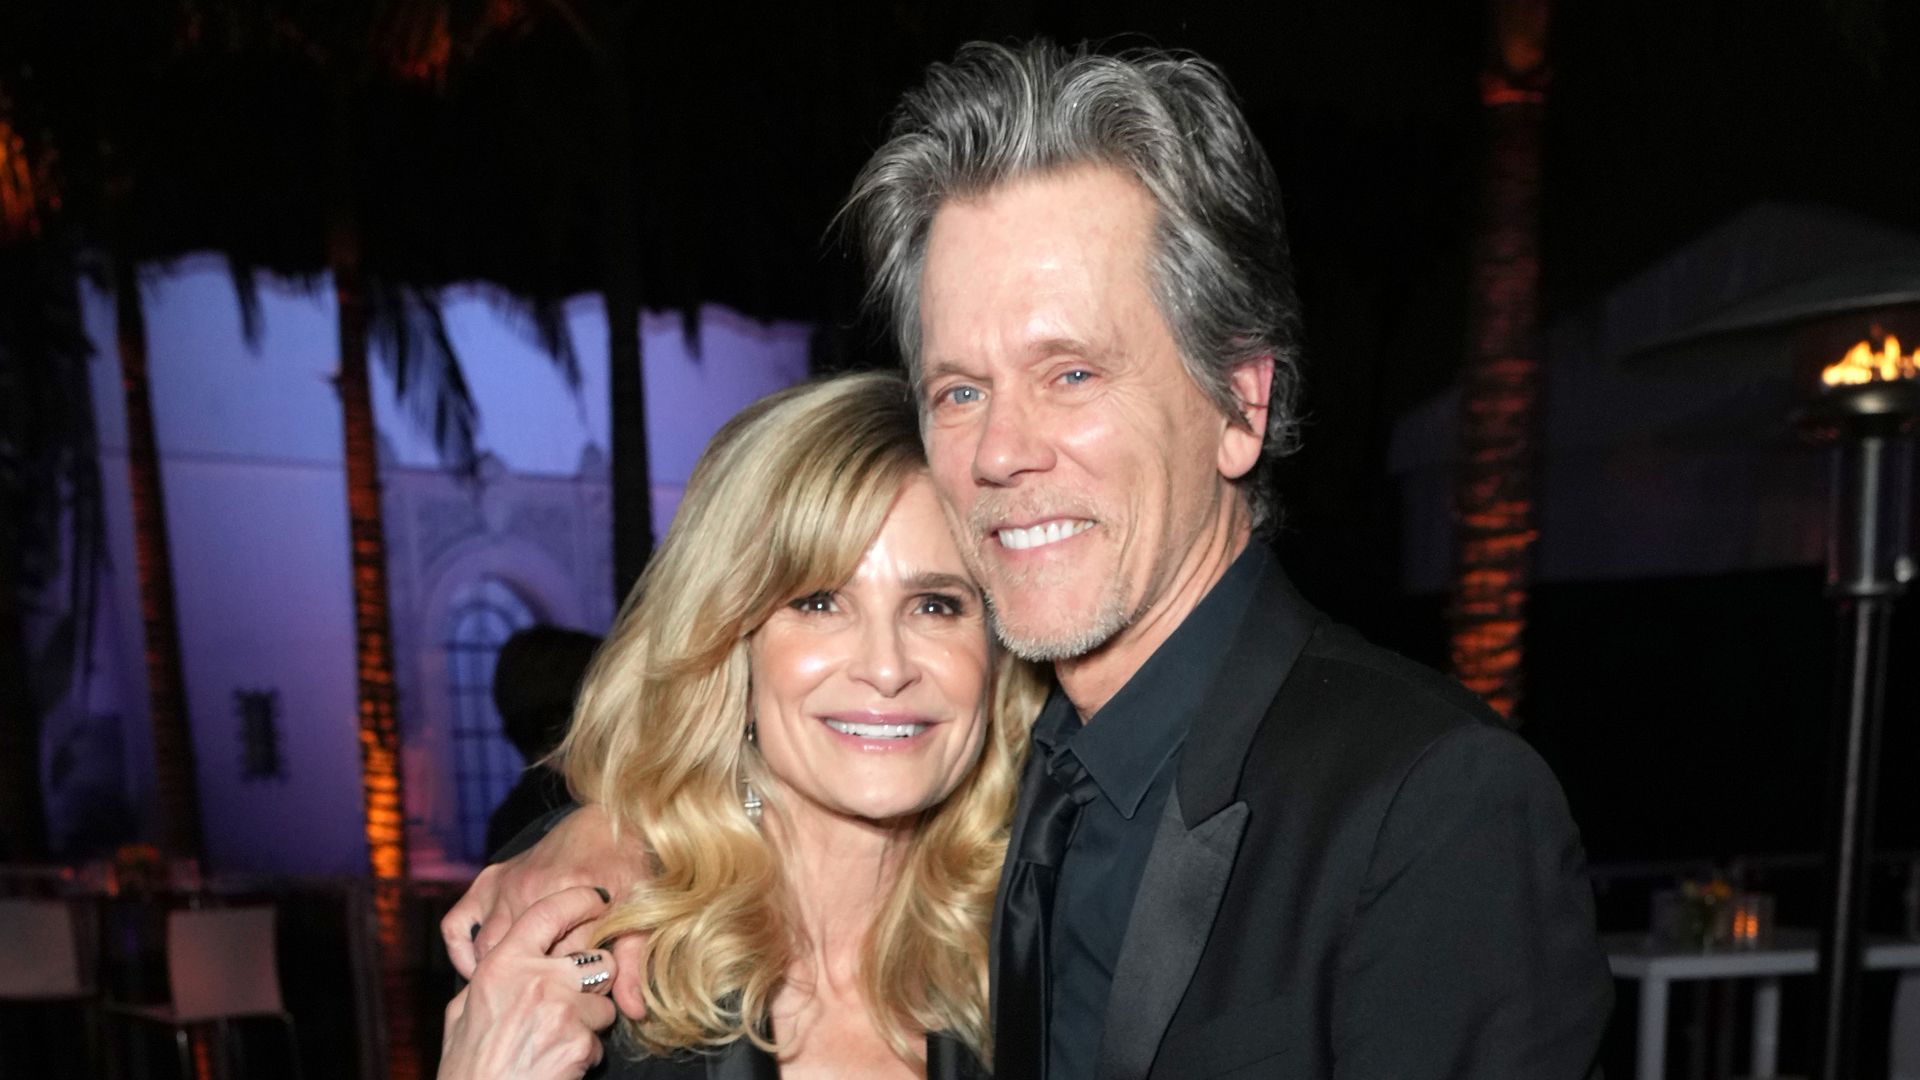 Kyra Sedgwick and Kevin Bacon attend the 2023 Vanity Fair Oscar Party Hosted By Radhika Jones at Wallis Annenberg Center for the Performing Arts on March 12, 2023 in Beverly Hills, California